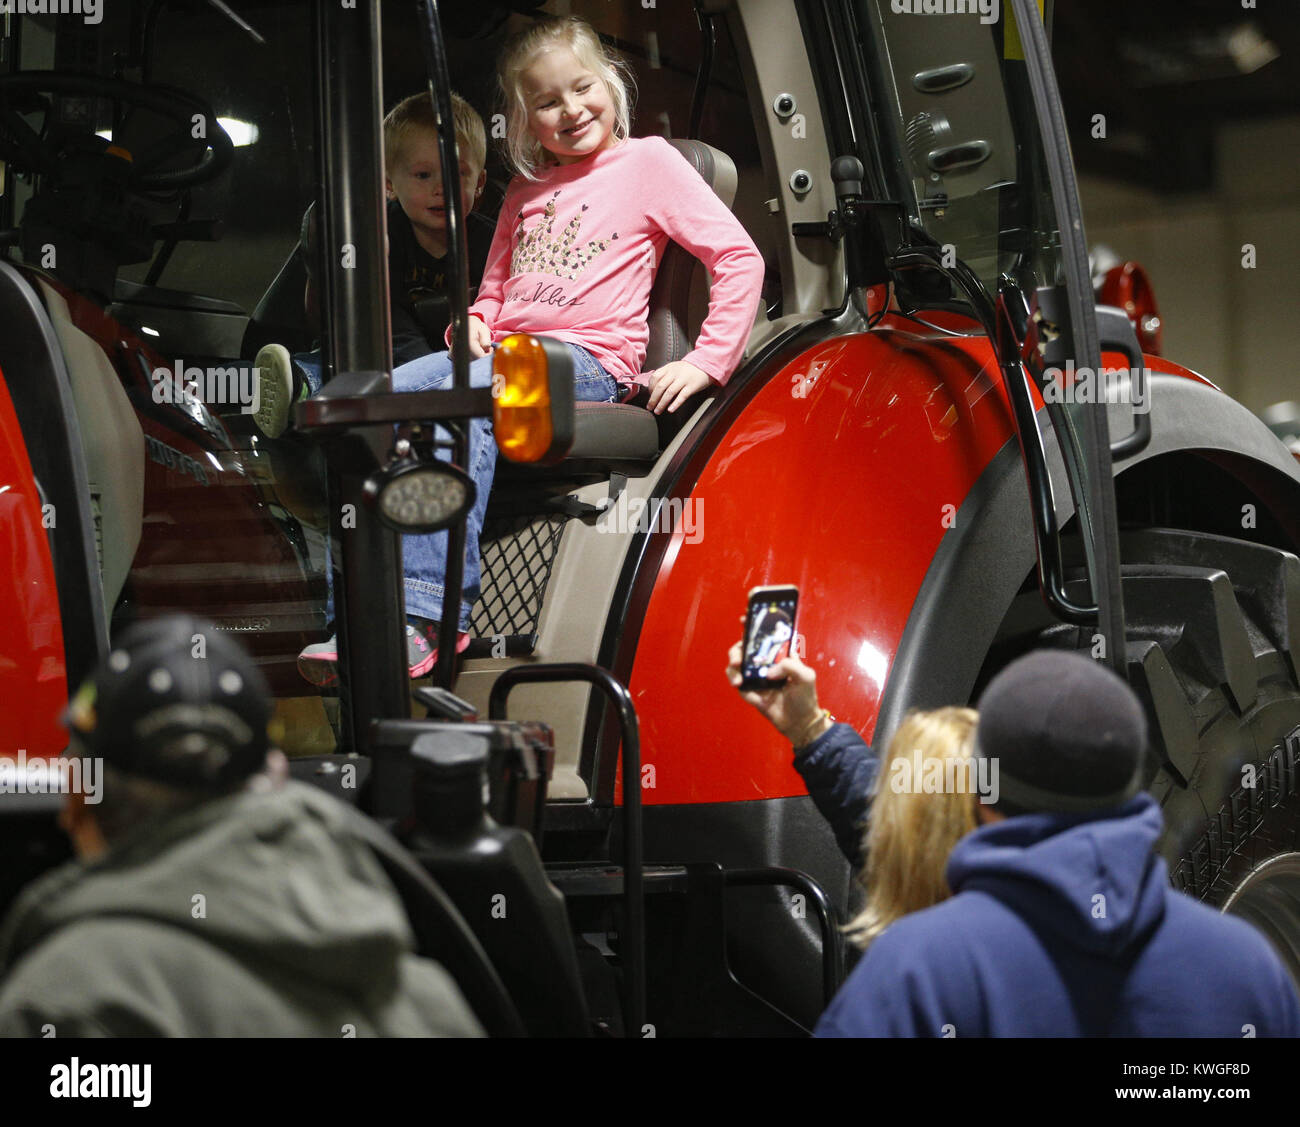 January 15, 2017 - Rock Island, Iowa, U.S. - Kylee Fischer, 5, of Grand Mound poses with her brother, Dylan, 3, for a photo on a Case tractor at the Quad-City Conservation Alliance Expo Center in Rock Island on Sunday, January 15, 2017. The 26th annual Quad-Cities Farm Show spans from Jan. 15-17 featuring over 200 agriculture companies and a variety of available products. (Credit Image: © Andy Abeyta/Quad-City Times via ZUMA Wire) Stock Photo